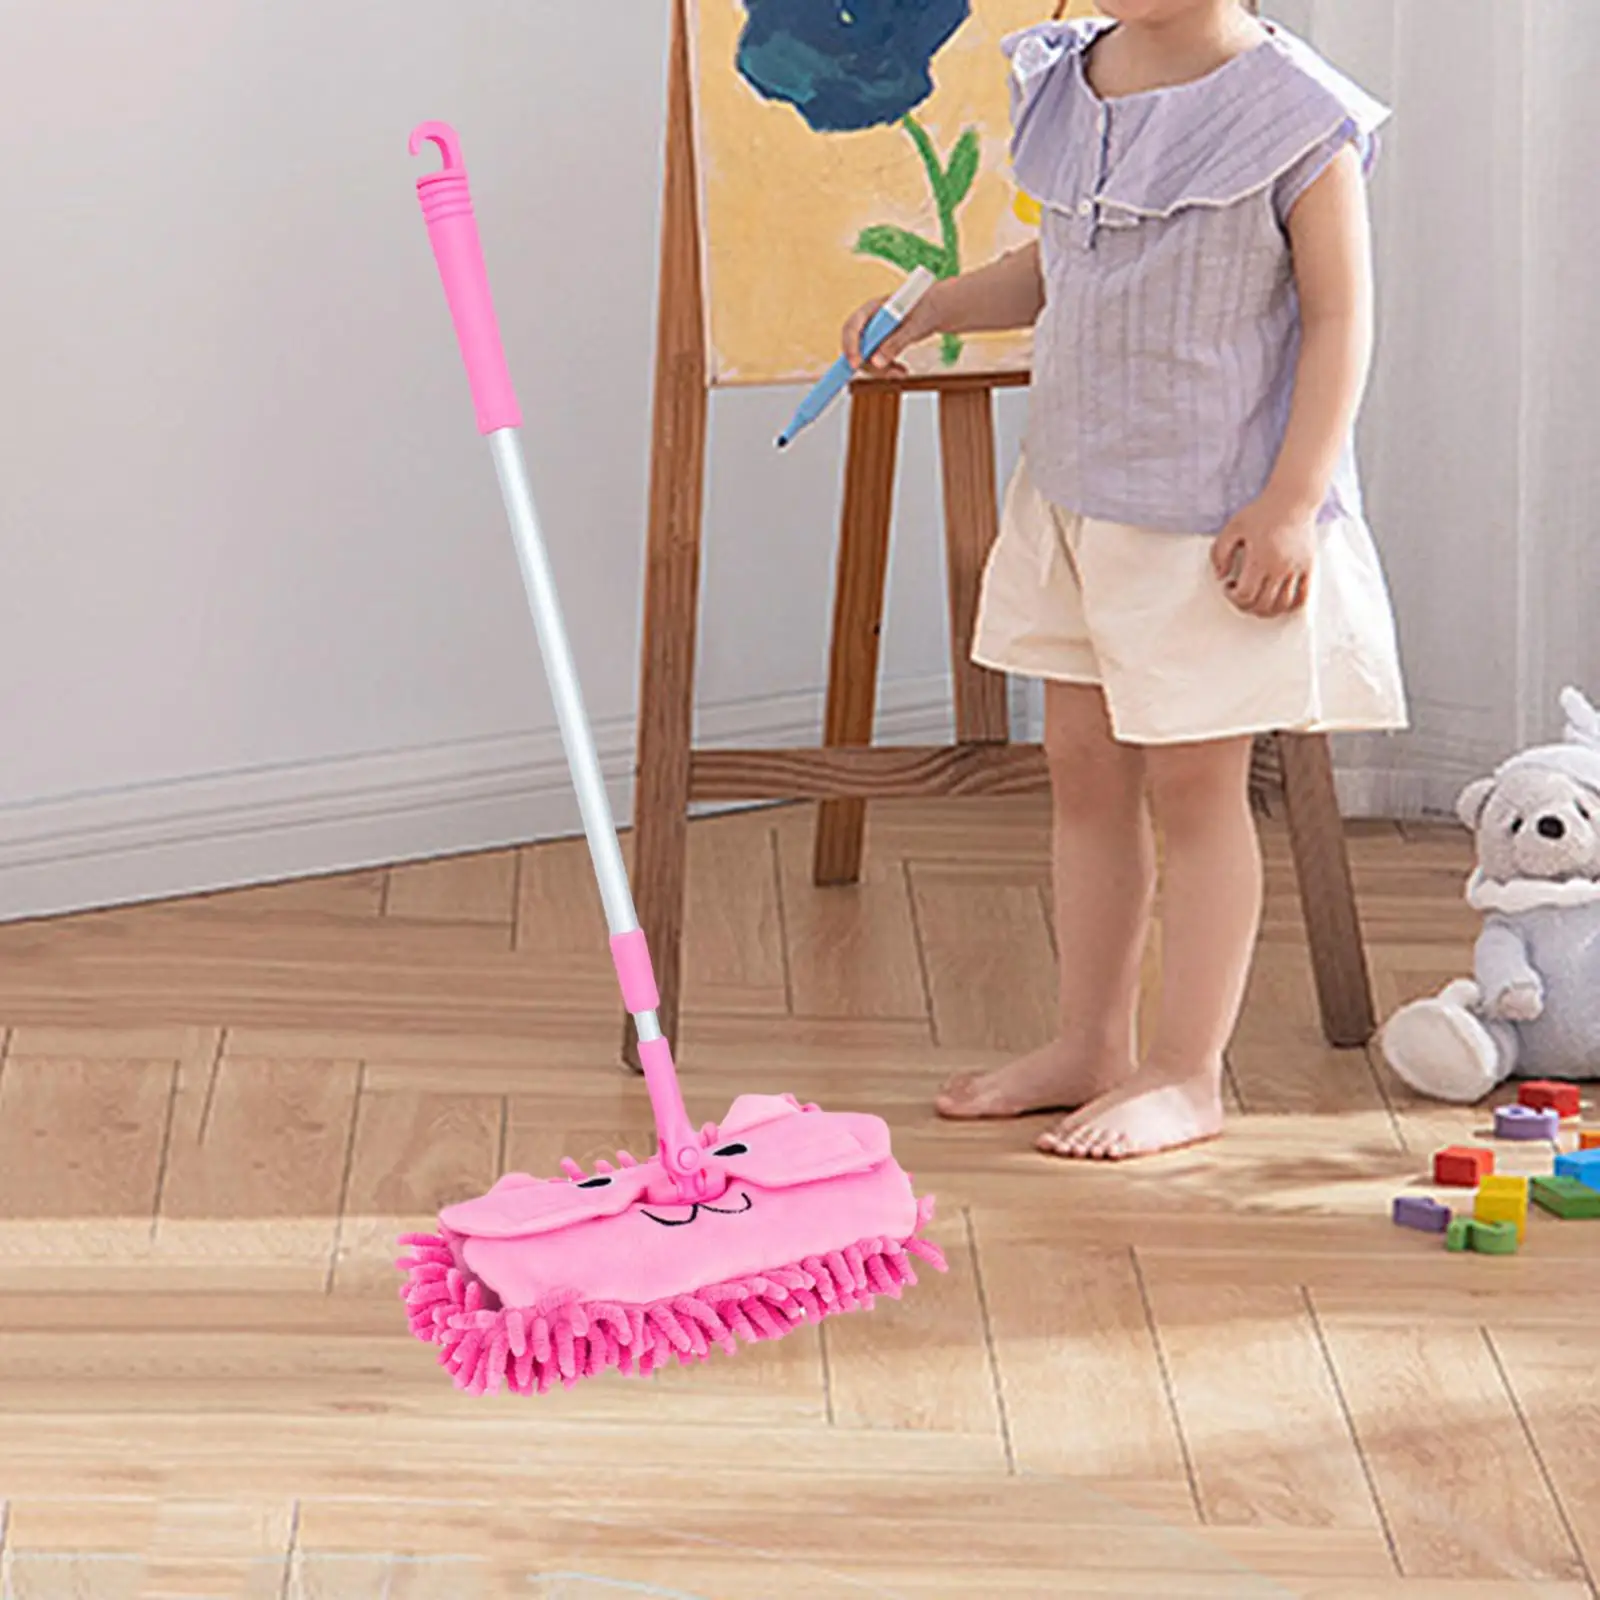 Kids Mini Mop Toy, Role Play Pretend Play, Basic Skills Kids Household Cleaning Toy, Play House Toy for Fine Motor Skills